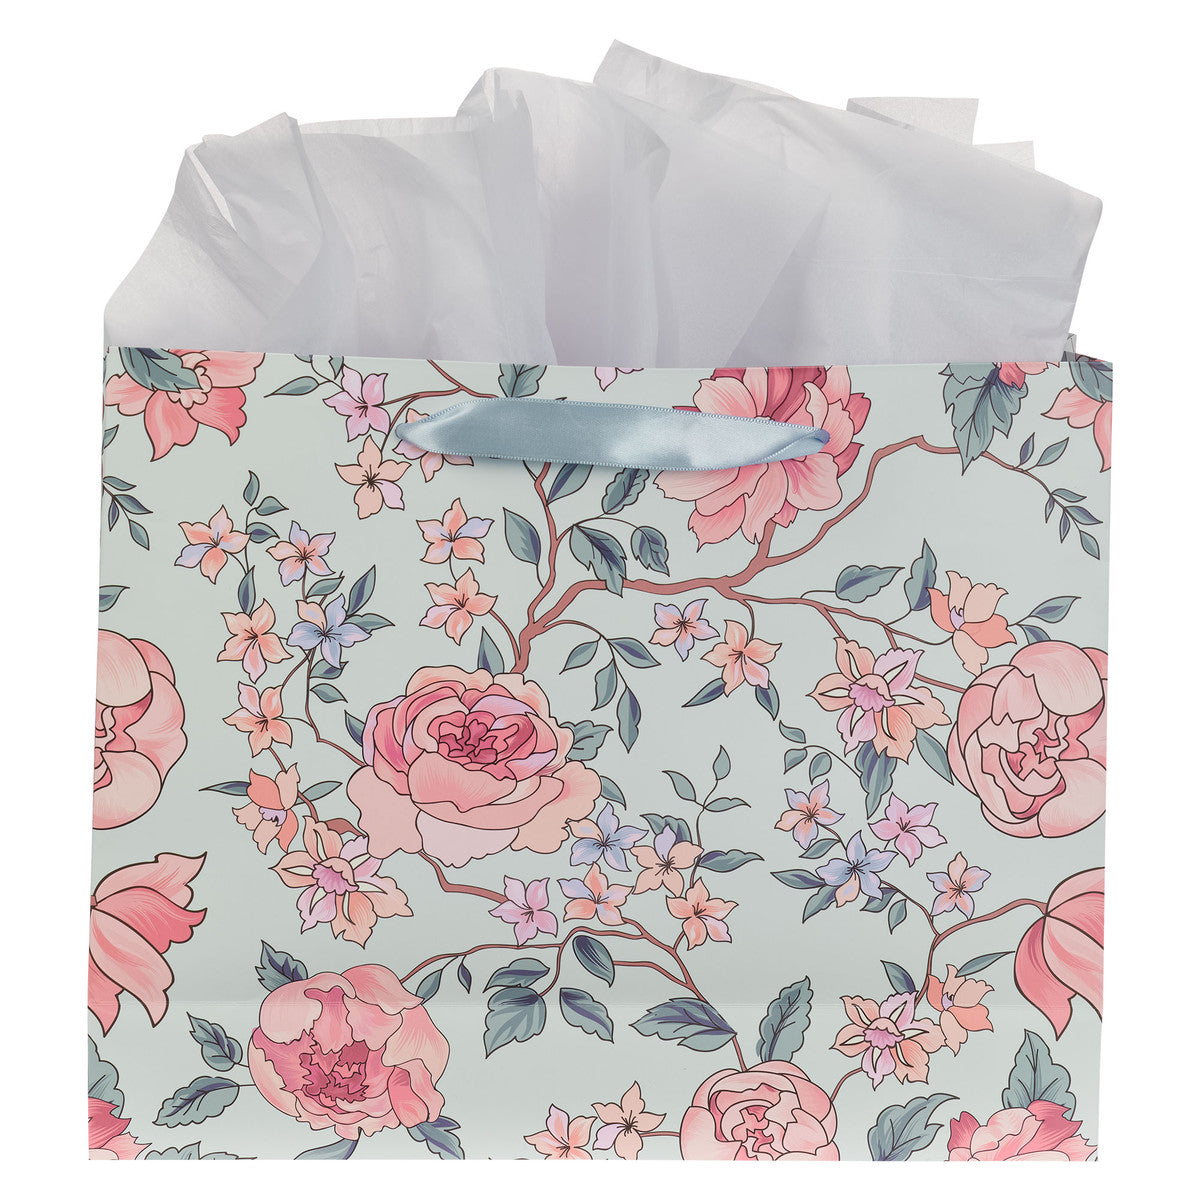 More Precious Than Rubies Pink Floral Large Landscape Bag with Card - Proverbs 5:13 - The Christian Gift Company